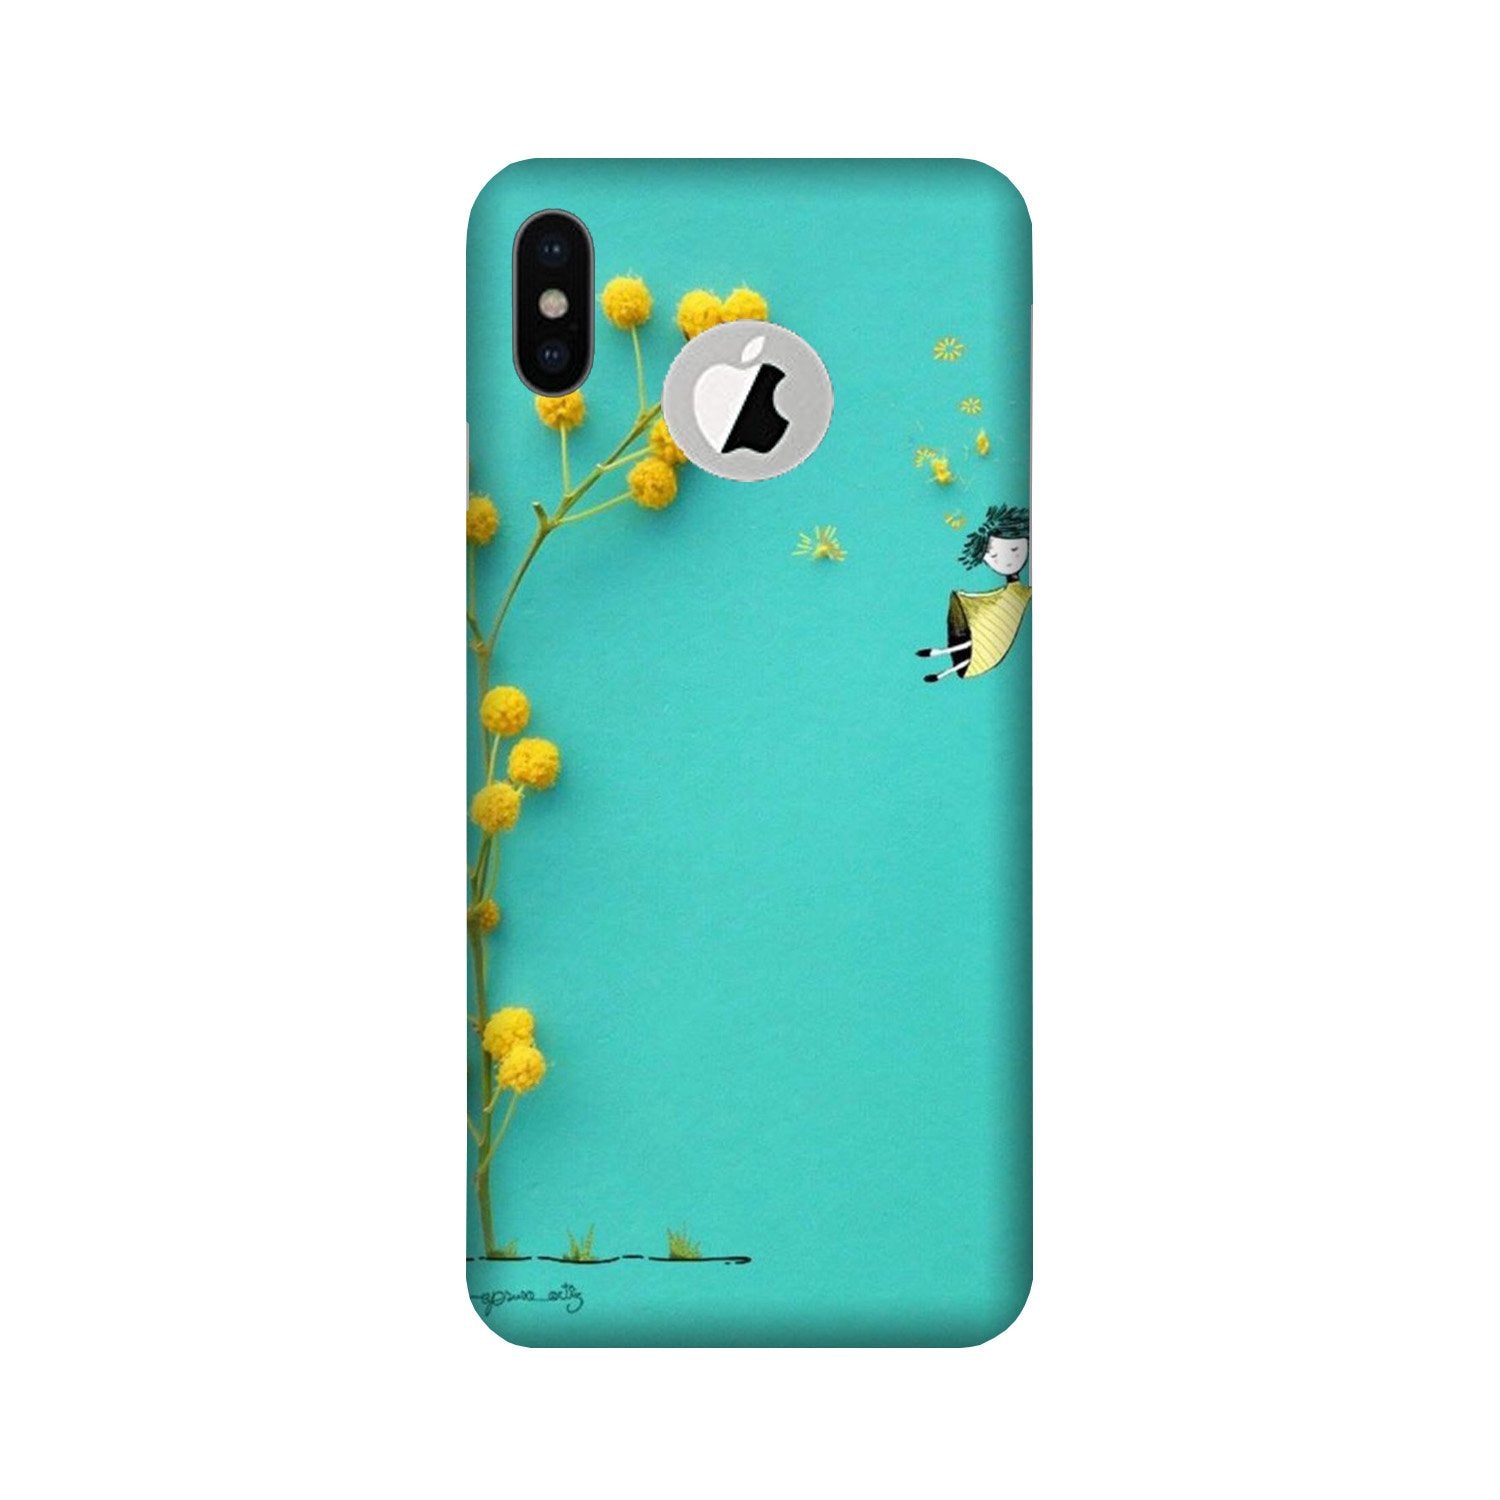 Flowers Girl Case for iPhone X logo cut (Design No. 216)